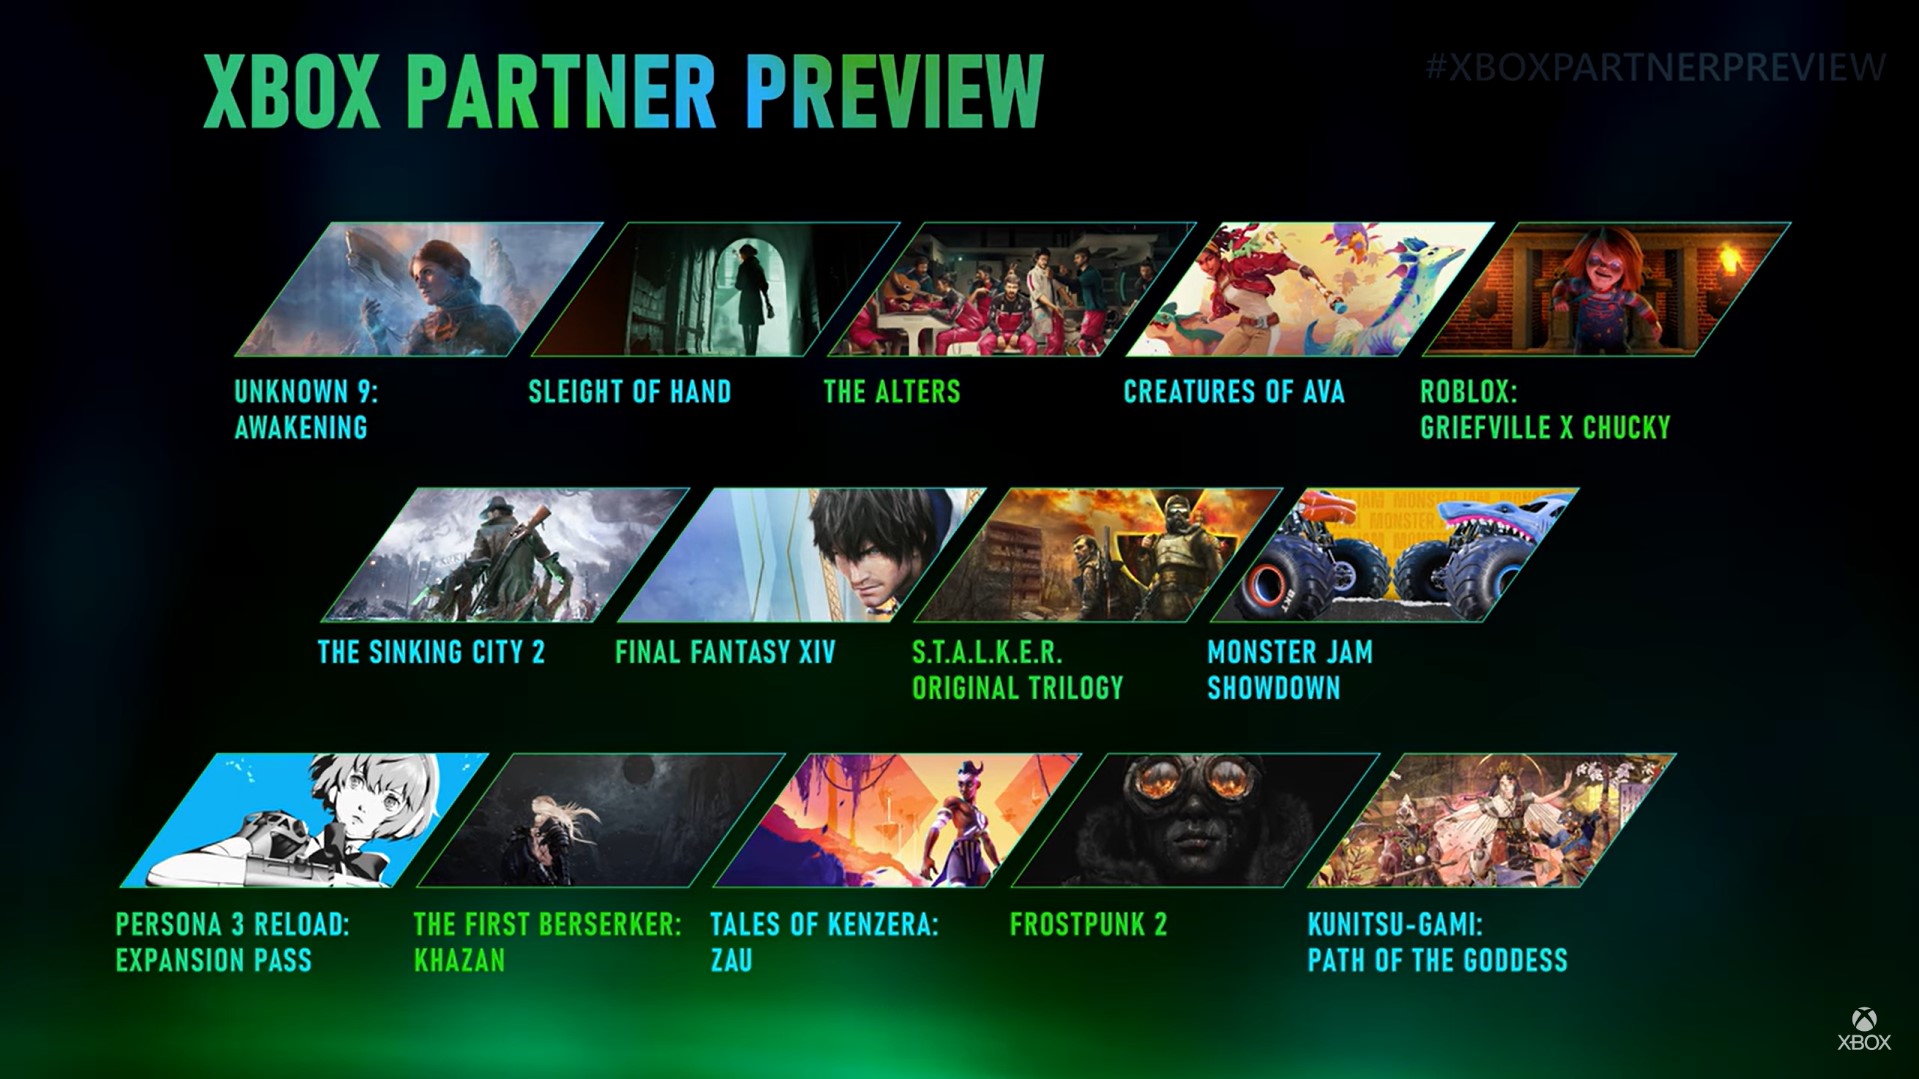 2nd Ever Xbox Partner Preview Adds A Slew Of Games To My Must-Play List